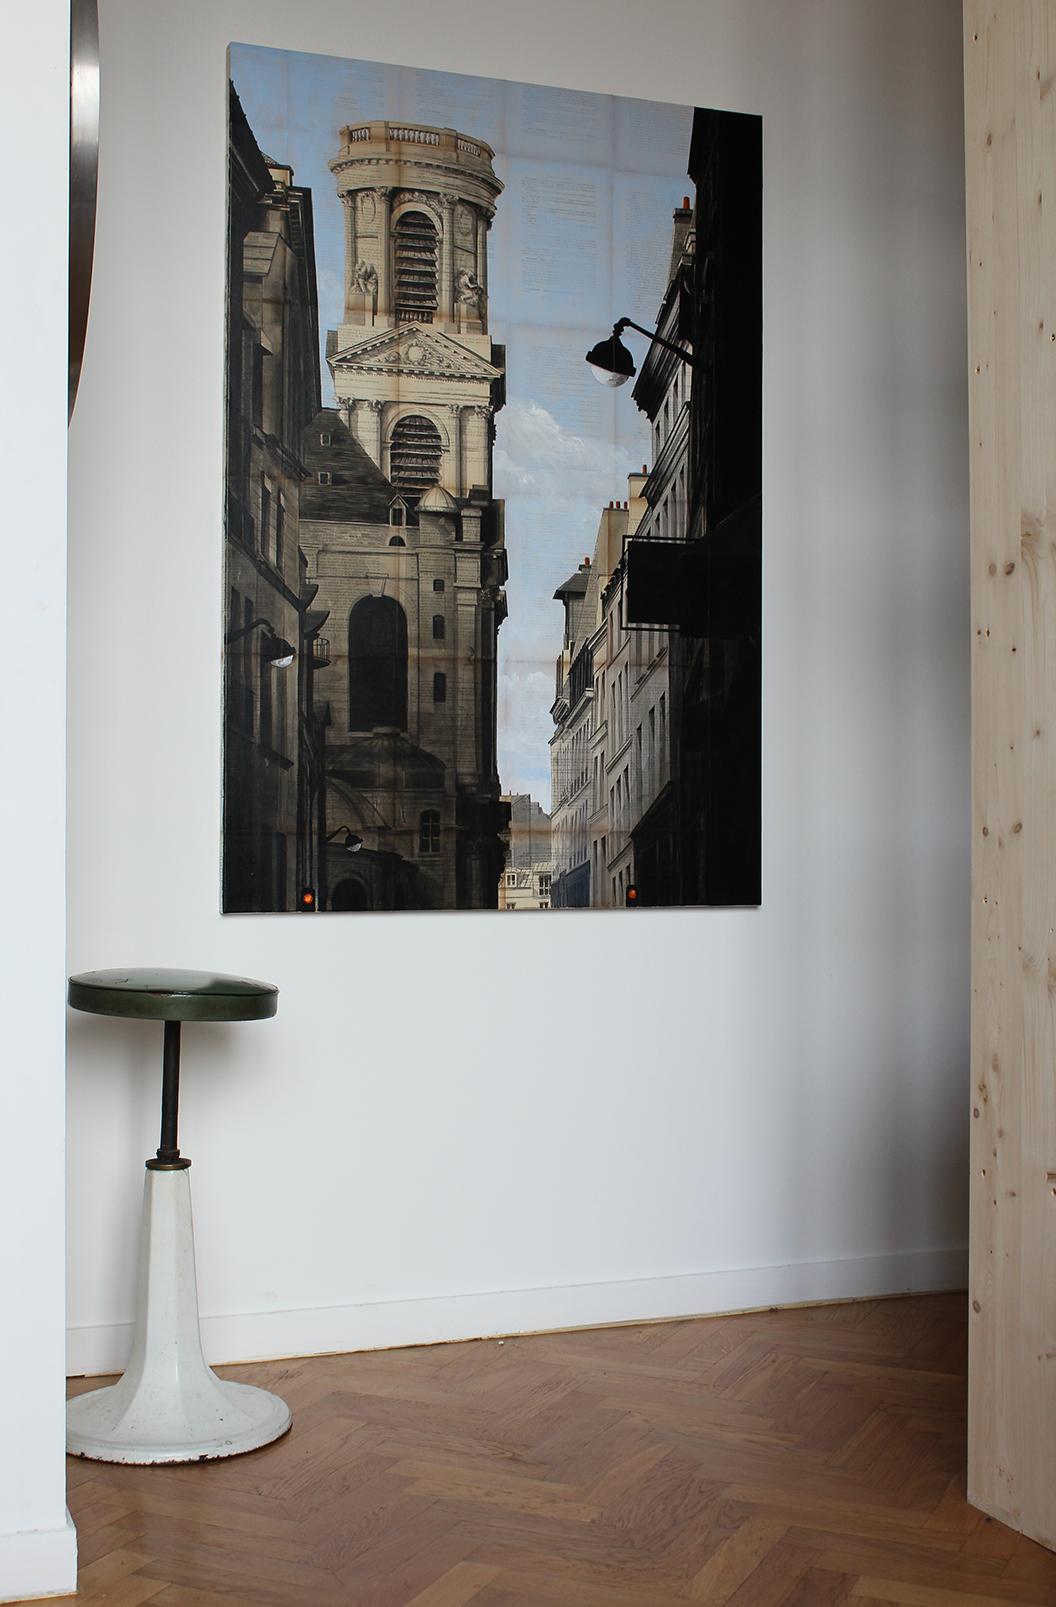 Ink and acrylic on old book pages mounted on canvas, 130 x 89 cm.
Through his figurative paintings, Guillaume Chansarel seeks to capture the graphic identity of a city (in this case, the Saint Sulpice church in Paris), in the same way as an